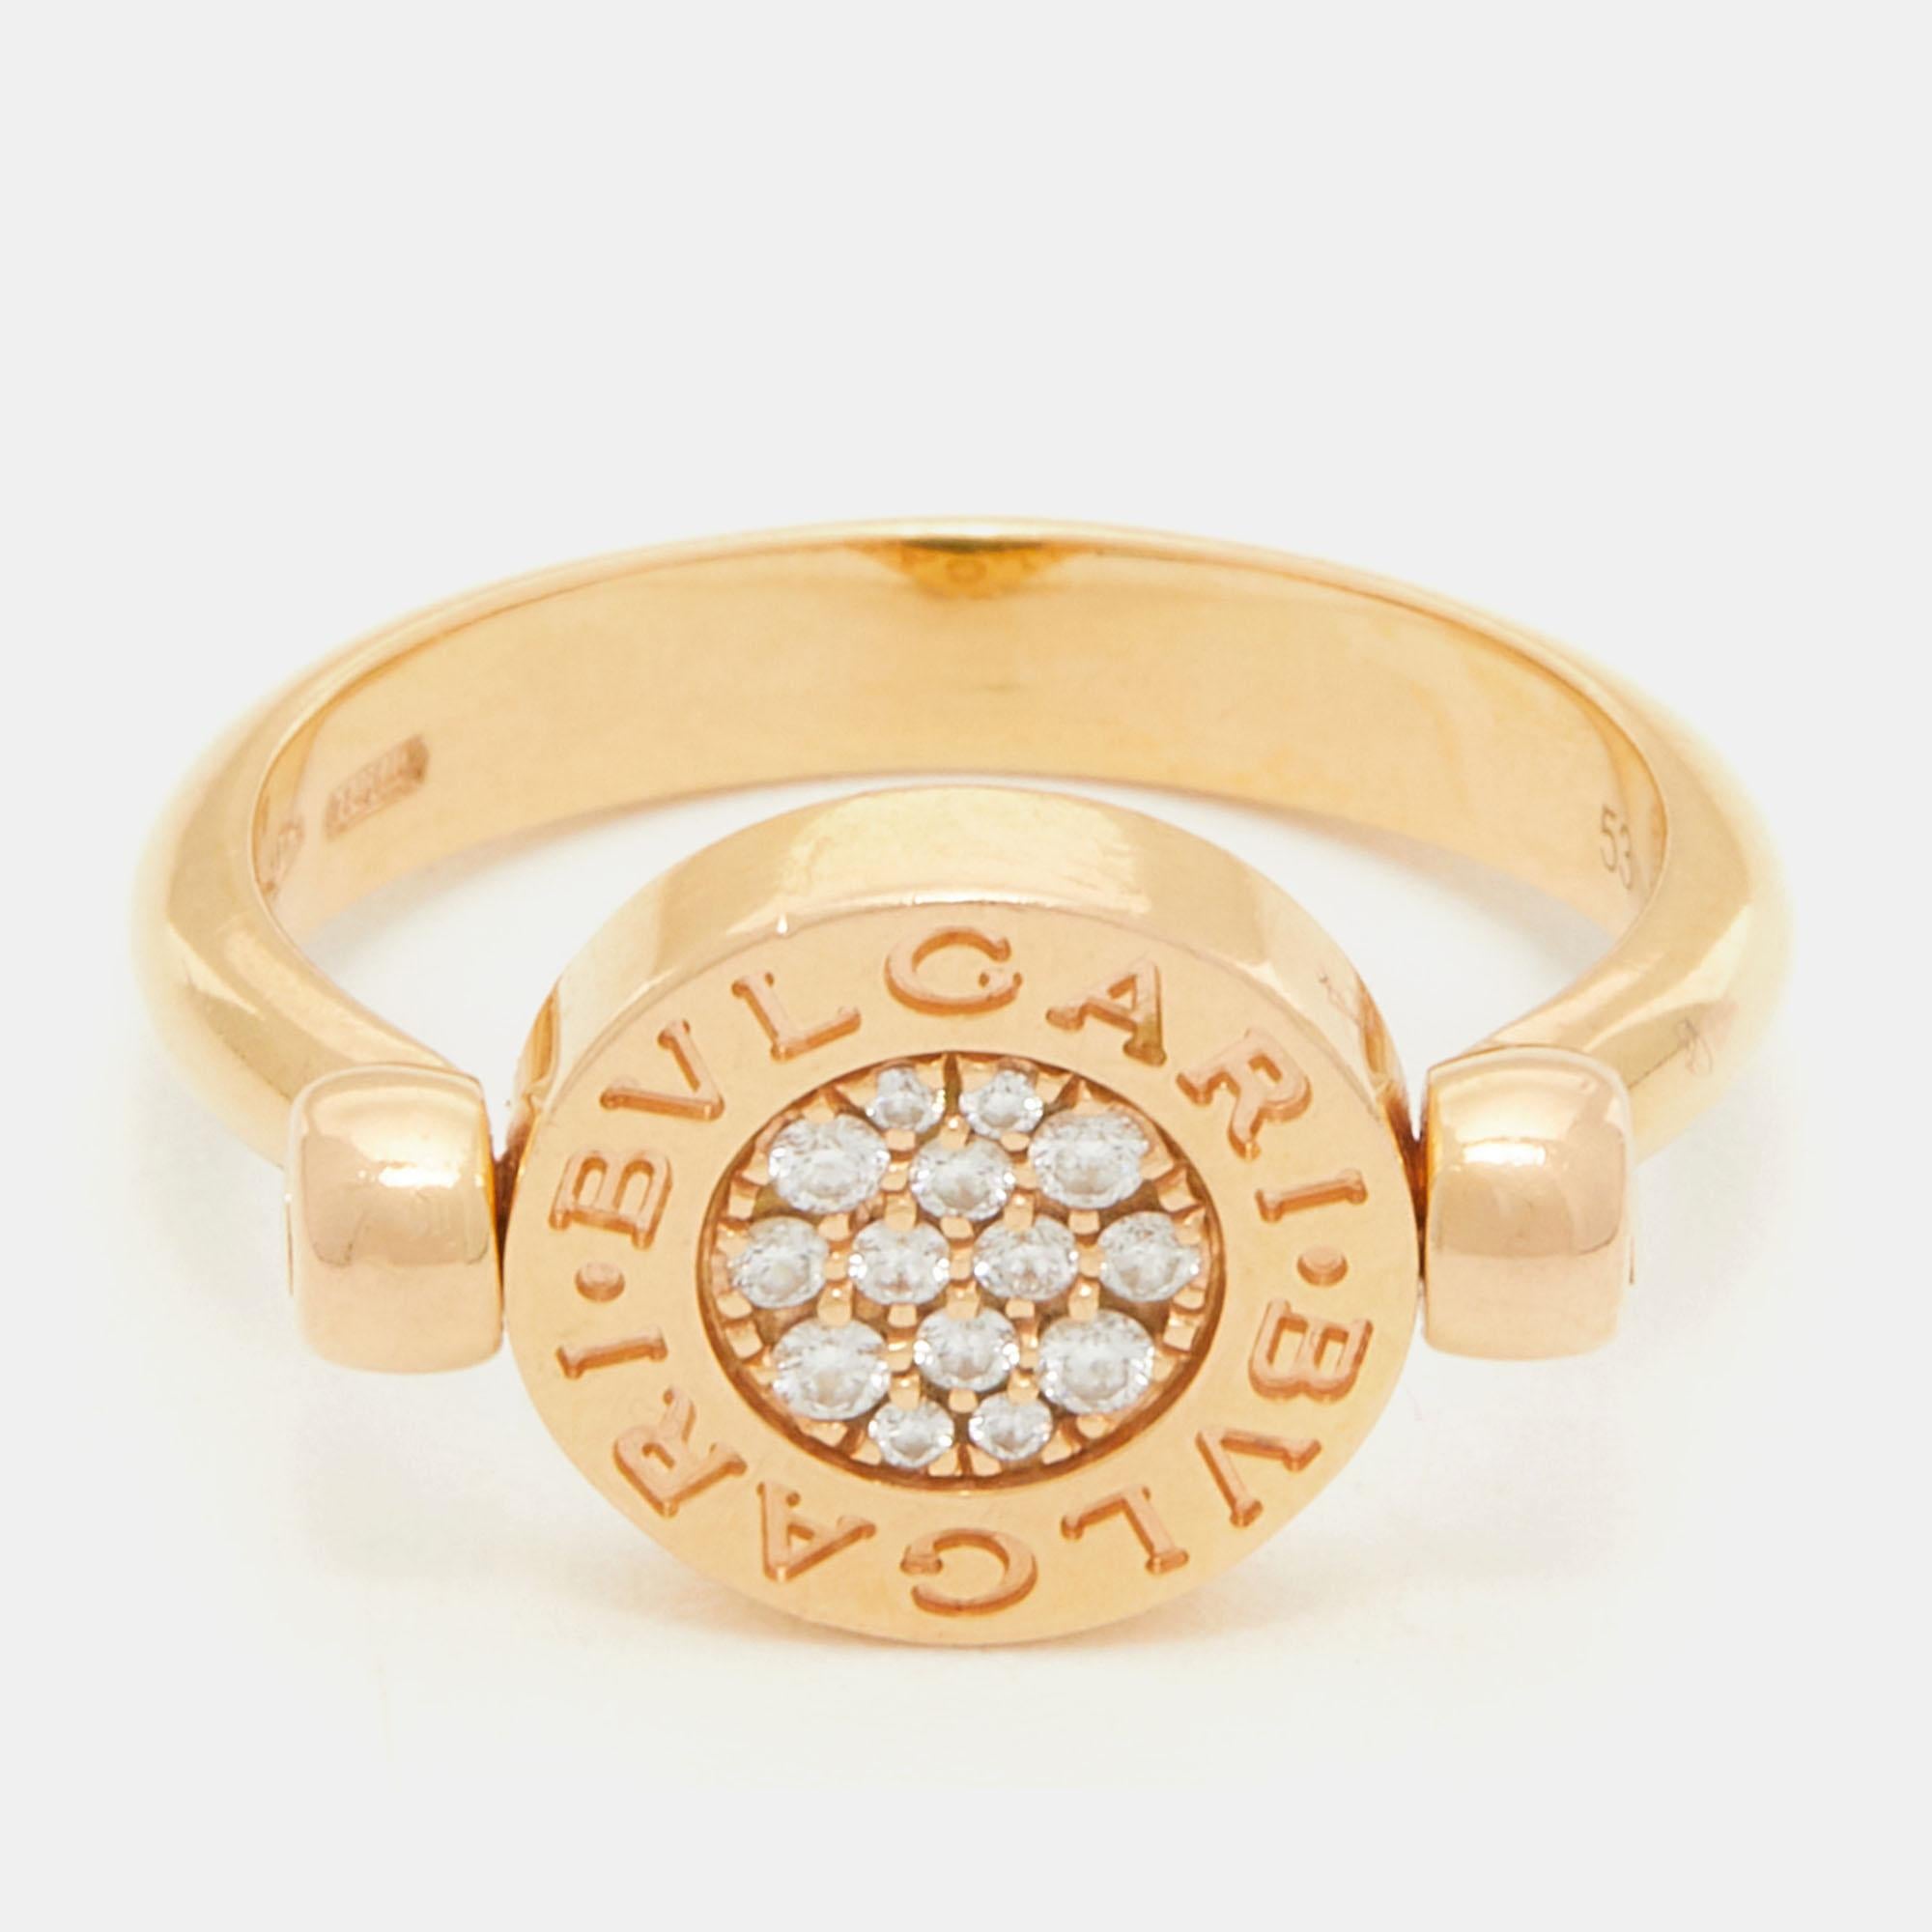 The Bvlgari Bvlgari logo of the brand—a characteristic feature of the Bvlgari designs—was inspired by the inscriptions on ancient coins. With history engraved on the very face, this beautiful ring delivers a harmonic balance of ethereal 18k rose